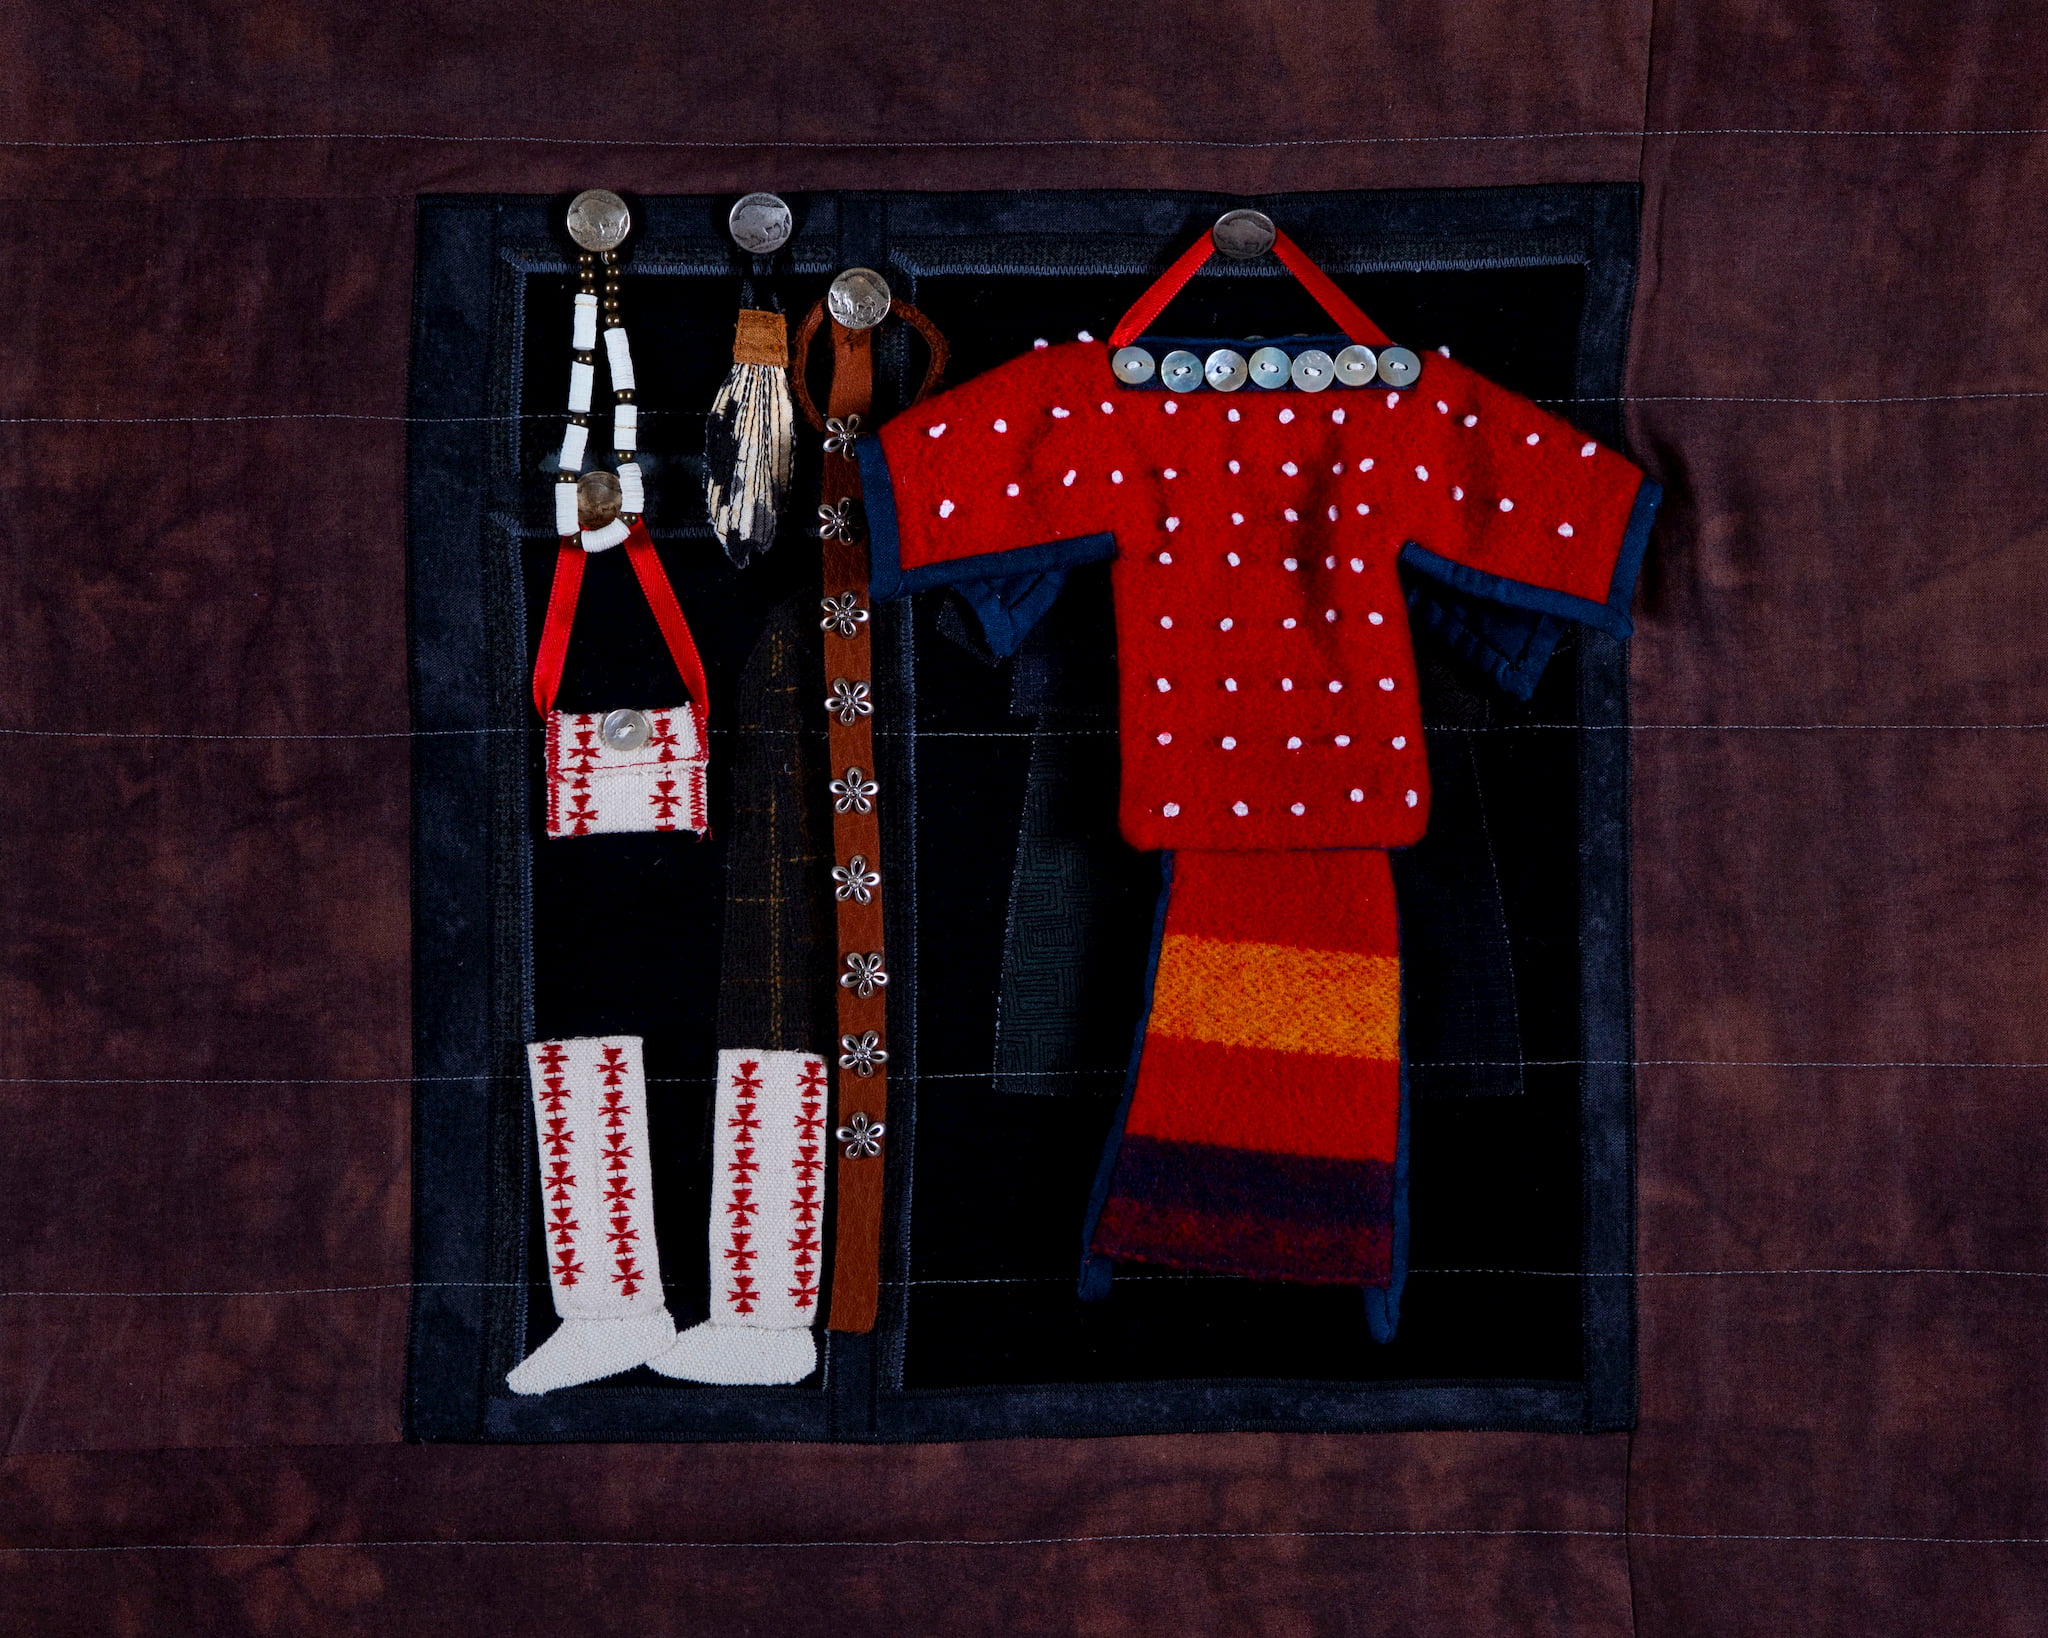 Susan Hudson, MMIW Since 1492, 2018. Cotton fabric, batting, thread, commercial buttons, leather; 94 x 54 x 1/2" Image courtesy of the artist. Photograph by Tad Fruits. Craft in America Center Democracy